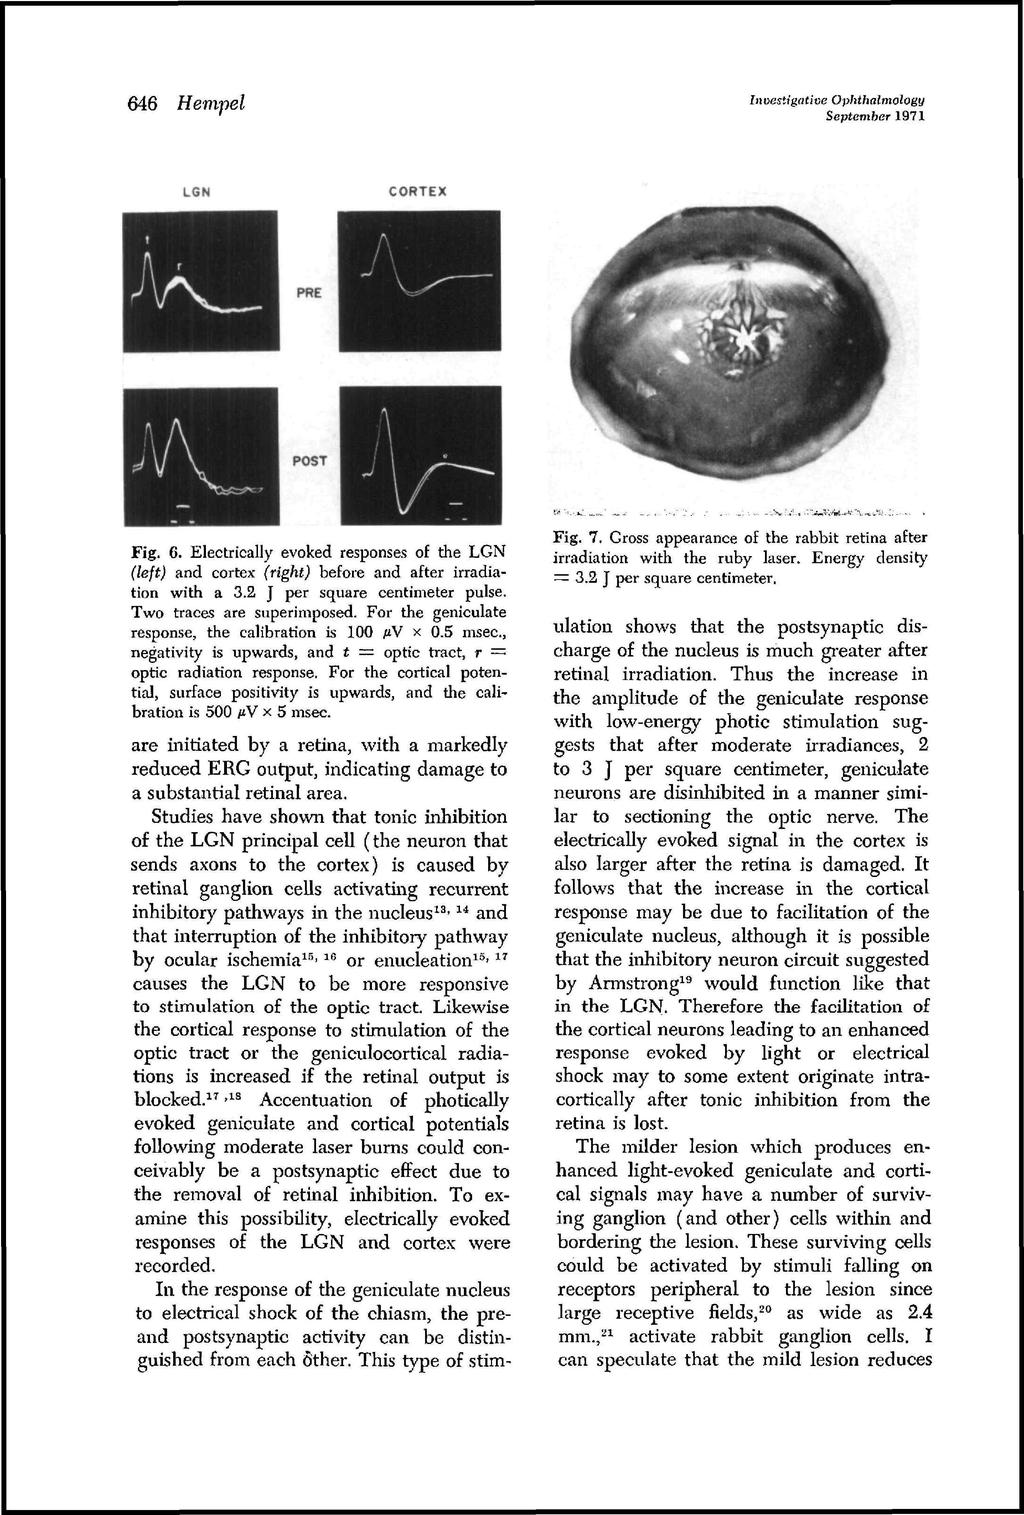 Investigative Ophthalmology September 1971 646 Hempel CORTEX LGN PRE POST Fig. 6. Electrically evoked responses of the LGN (left) and cortex (right) before and after irradiation with a 3.